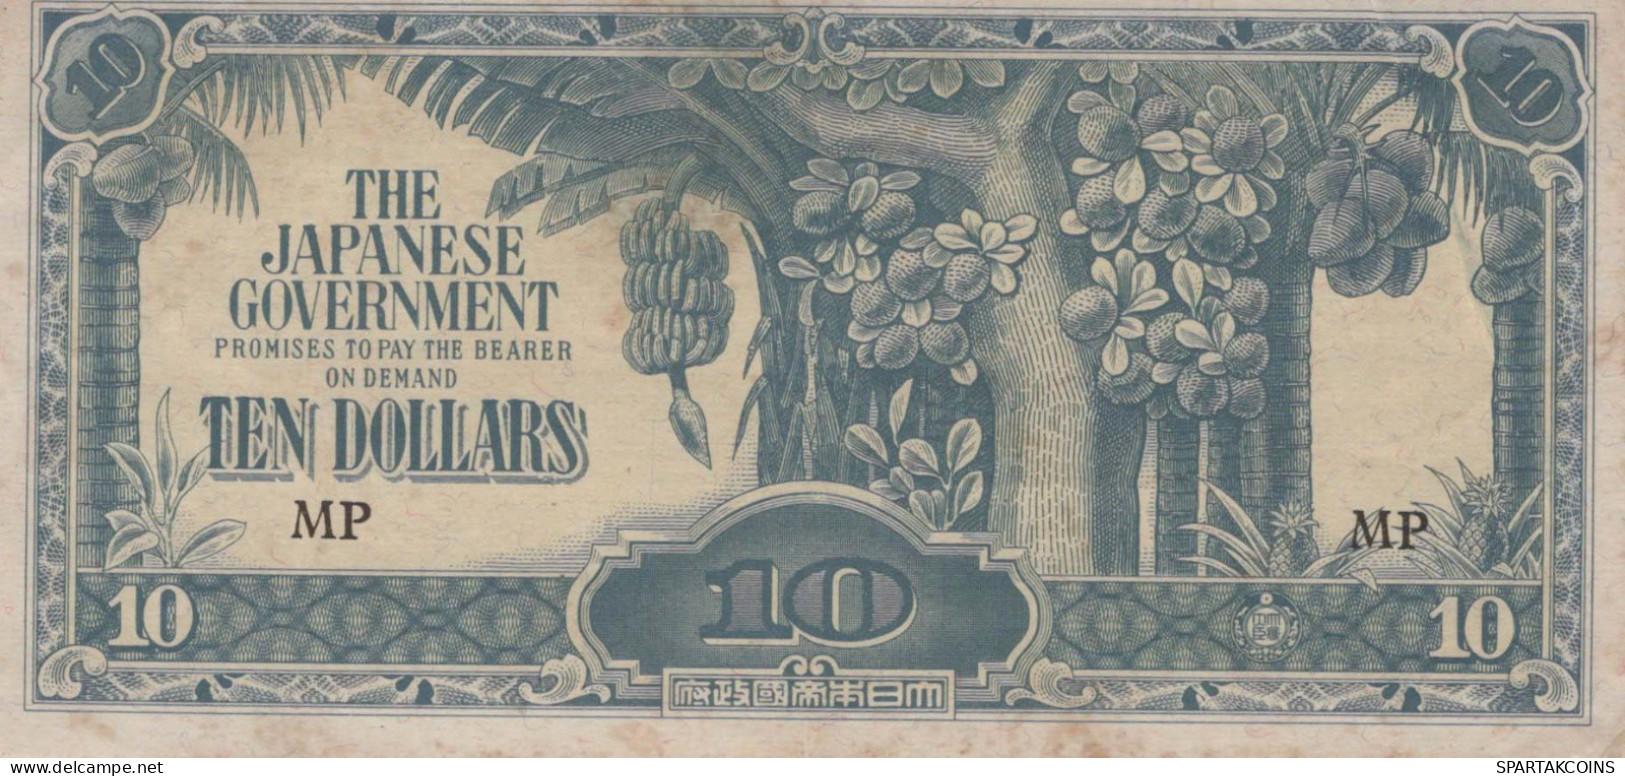 10 DOLLARS 1942-1944 Japanese Government MALAYSIA Papiergeld Banknote #PK234 - [11] Local Banknote Issues